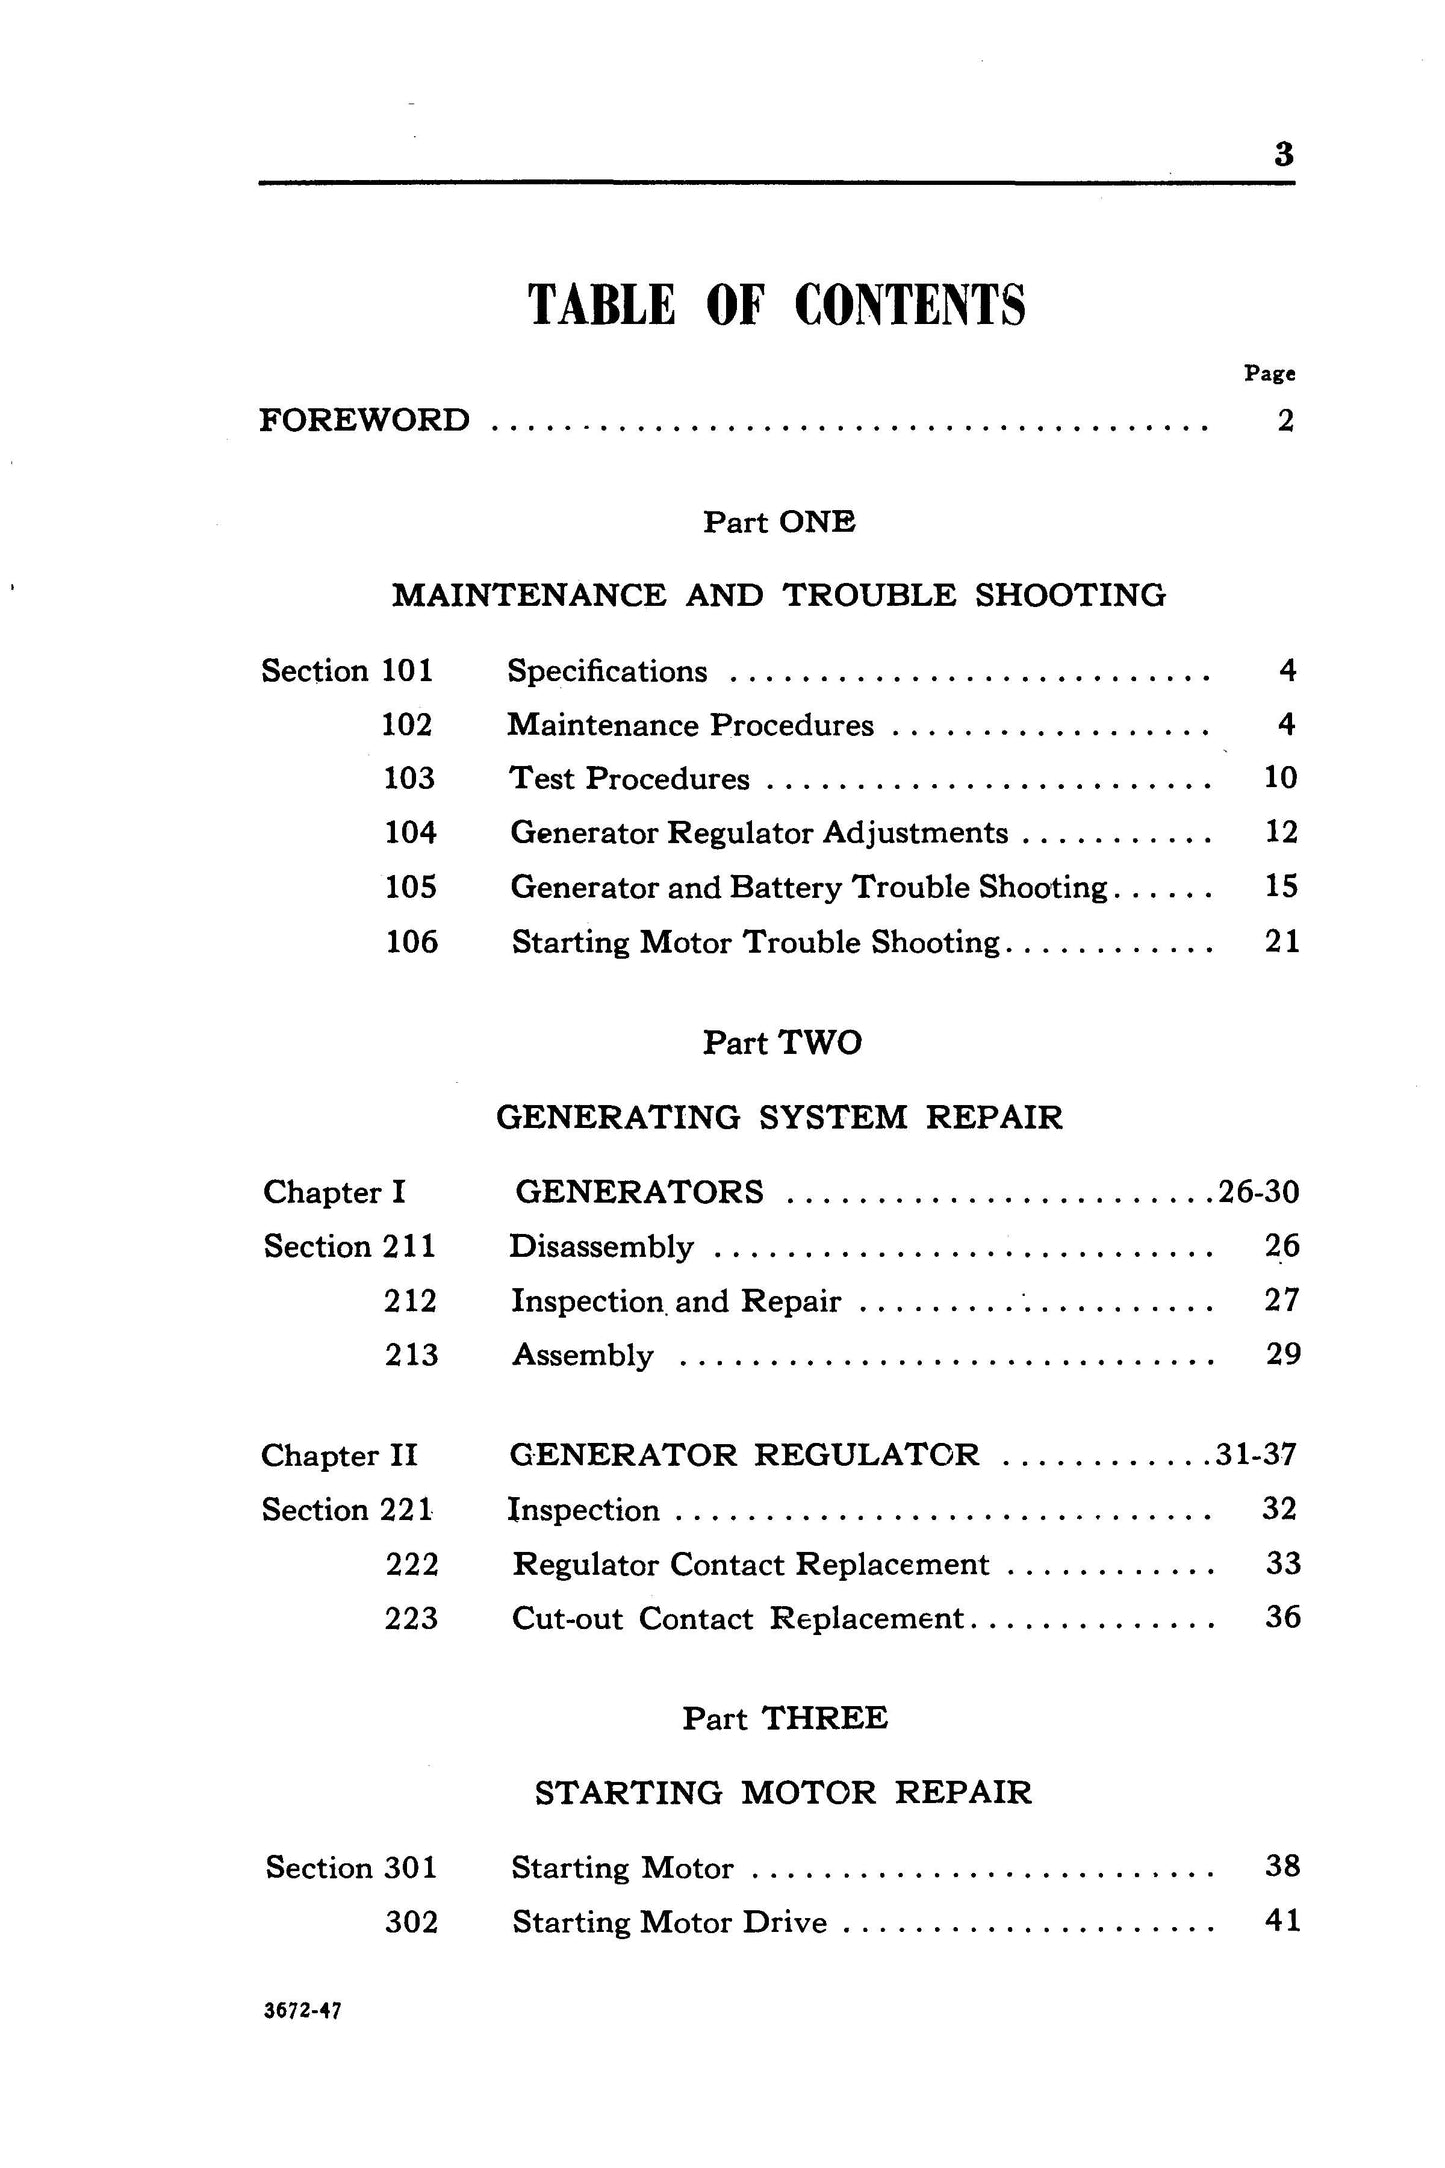 1928-1937 Ford Service Bulletins